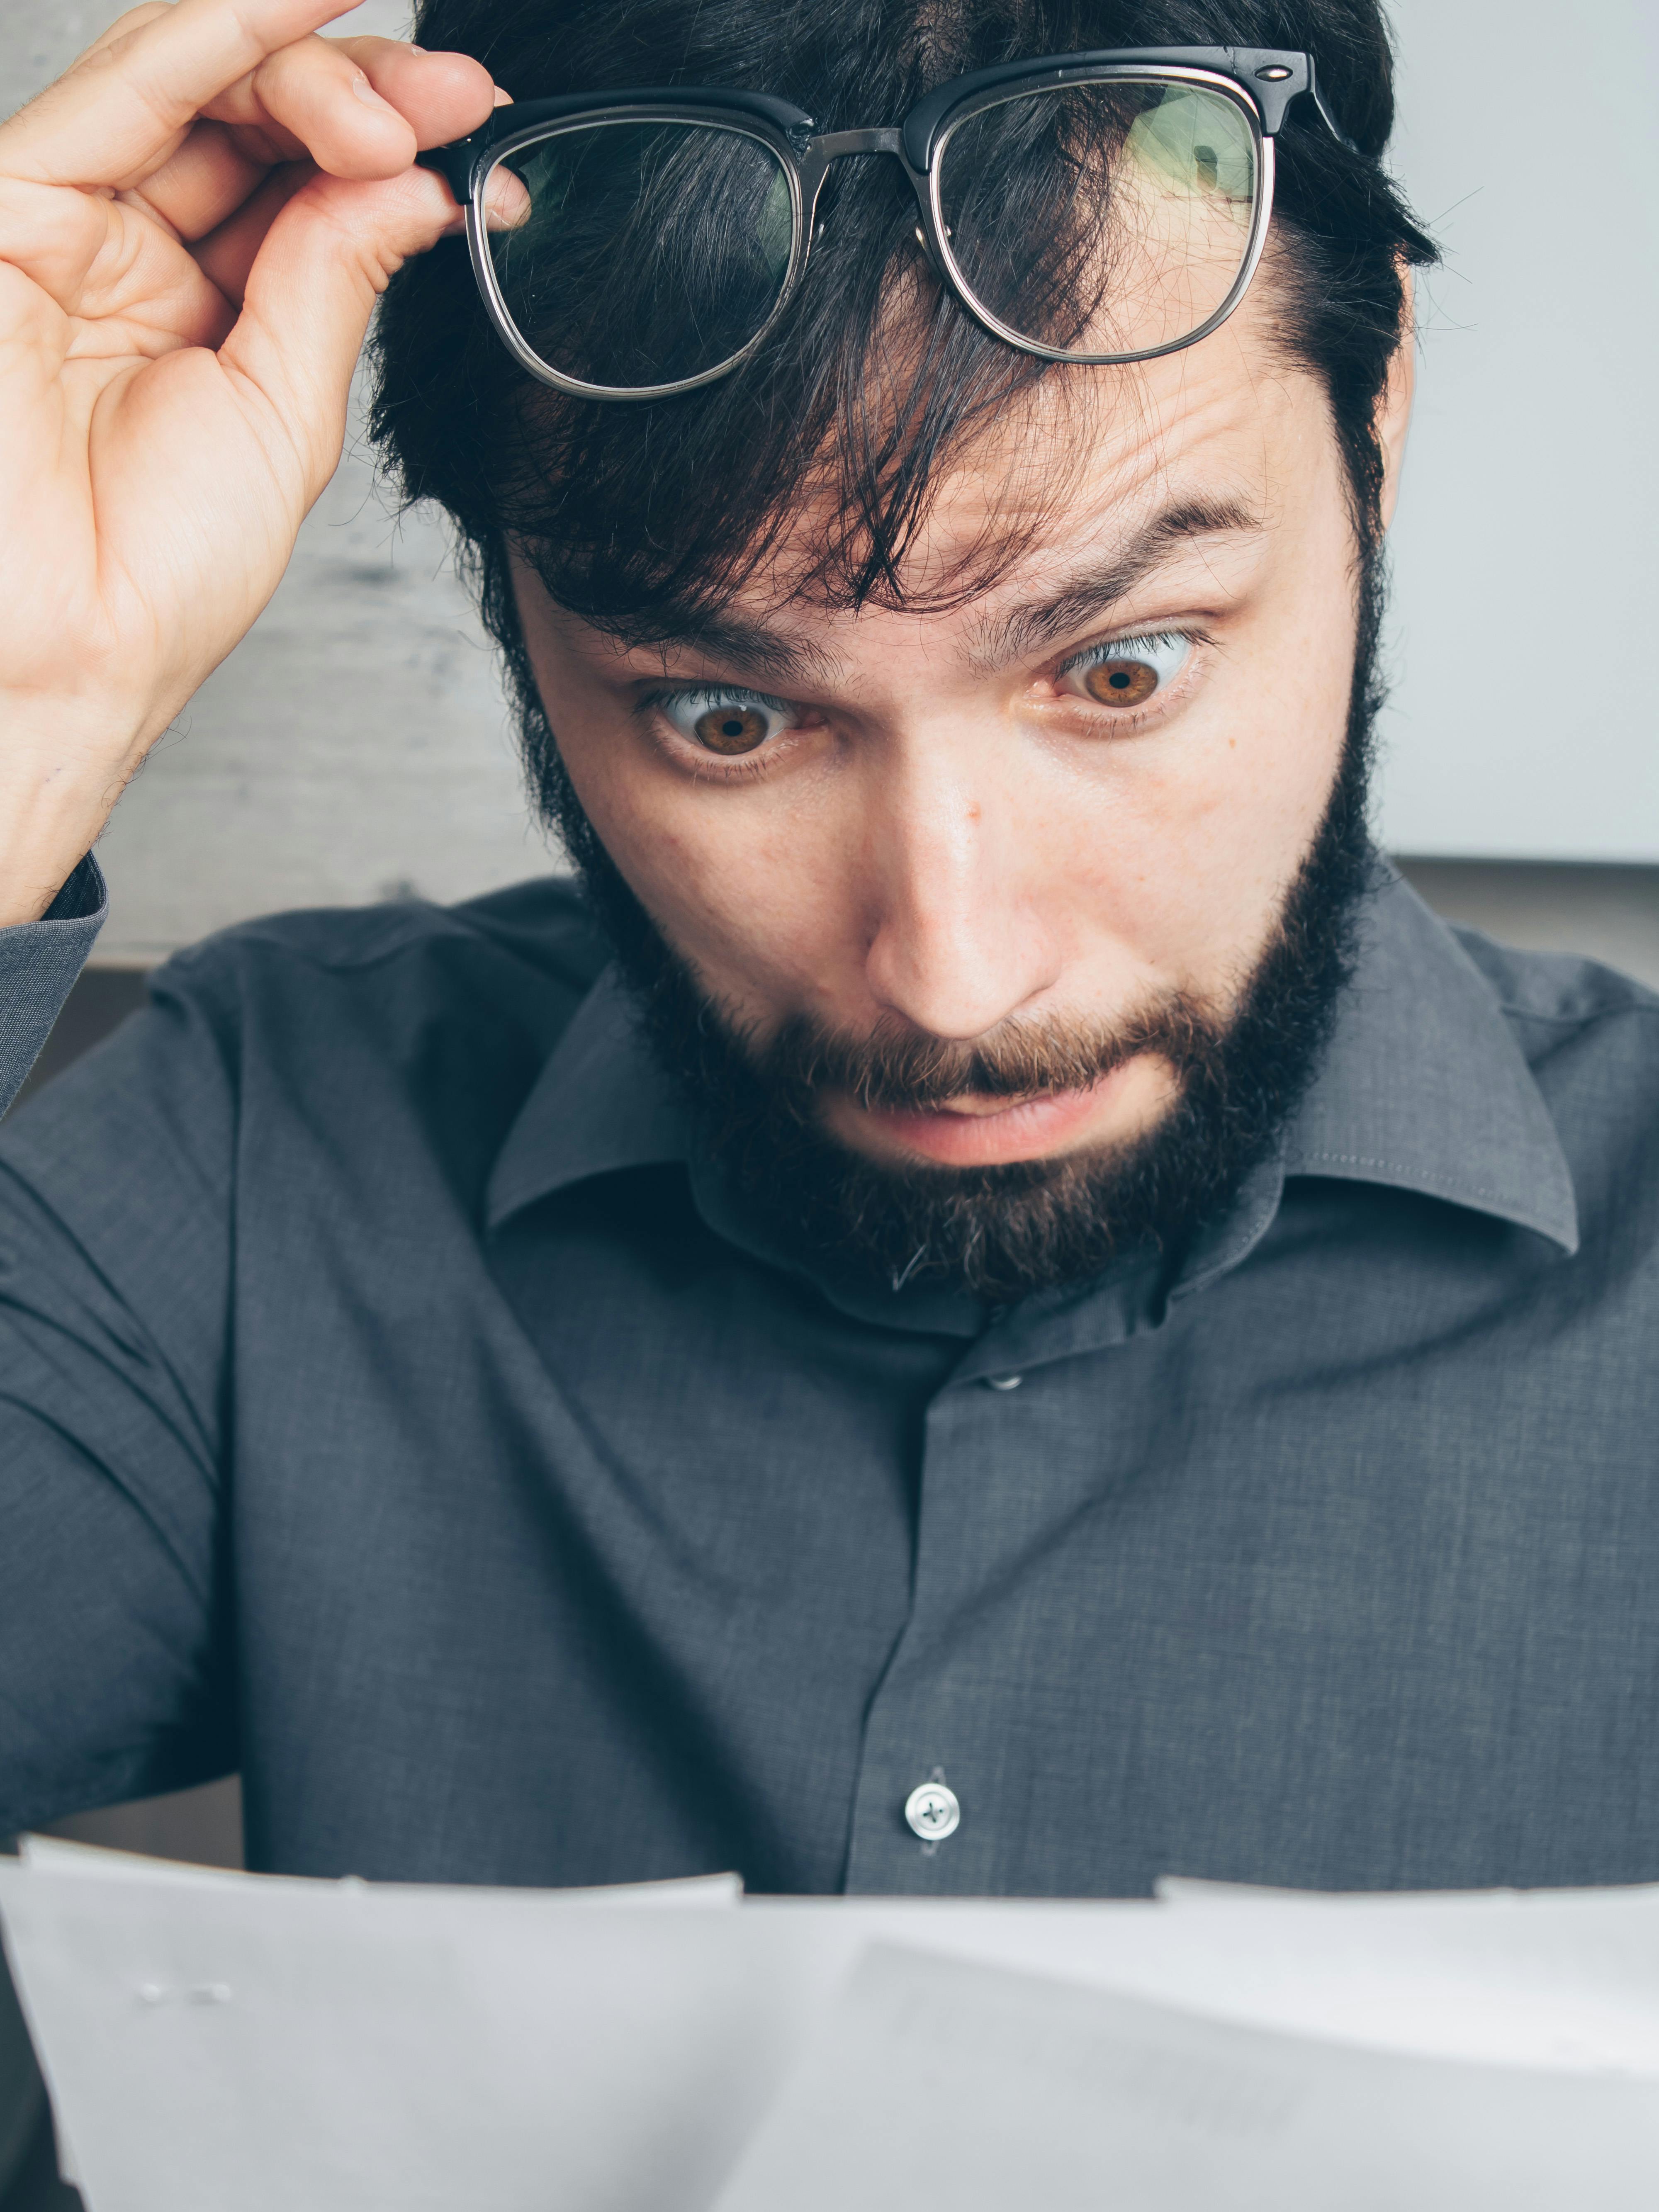 A shocked man reading a letter | Source: Pexels